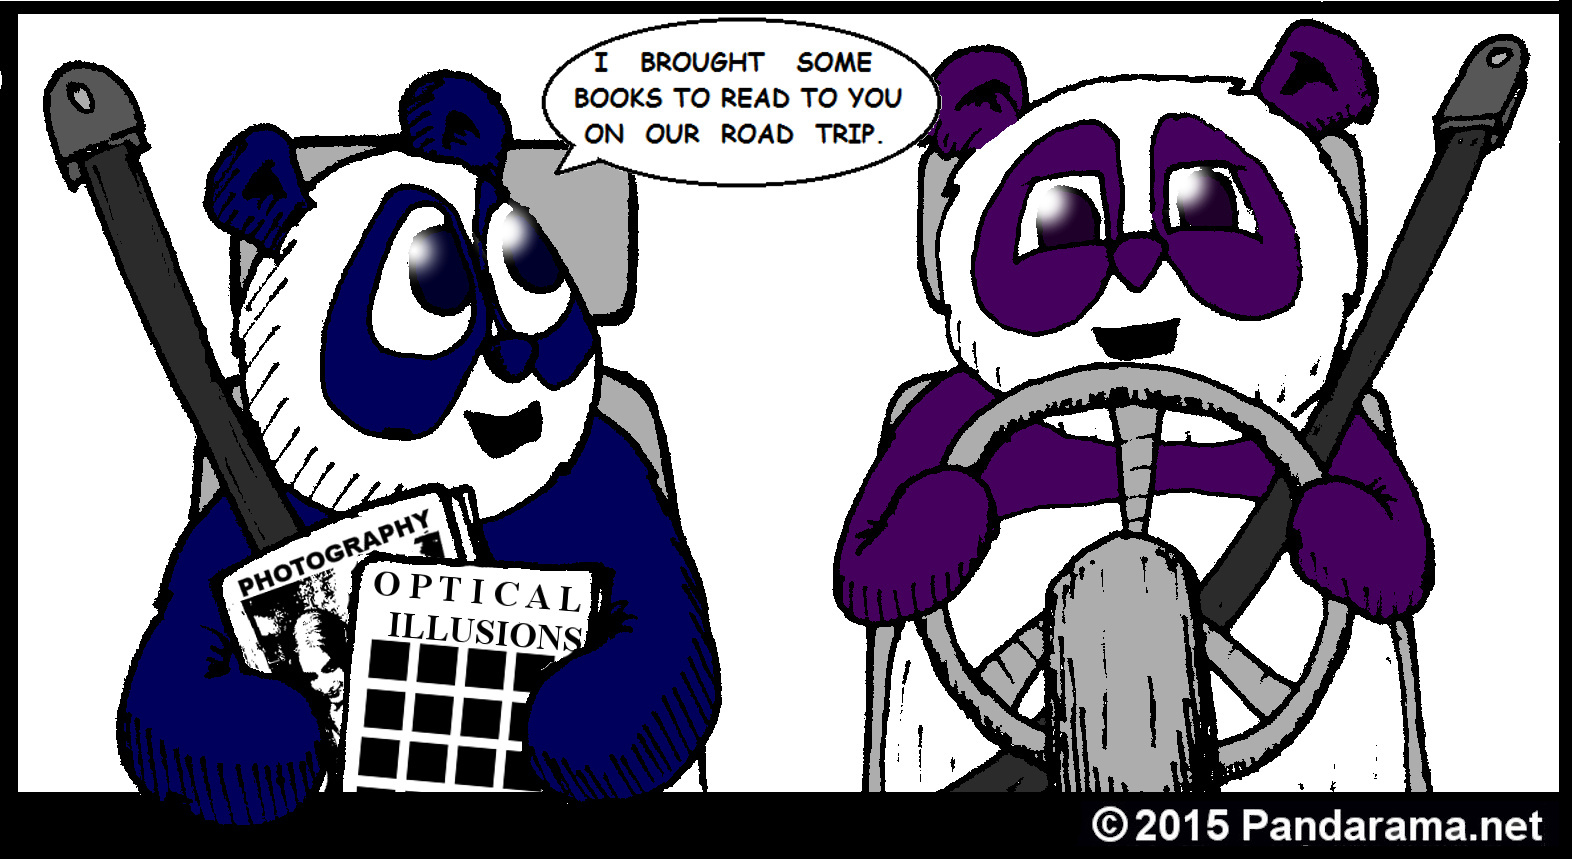 Pandarama Pandarama.net cartoon of two pandas on a roadtrip and the passenger has brought a book of optical illusions and a book of photography to read to the driver.